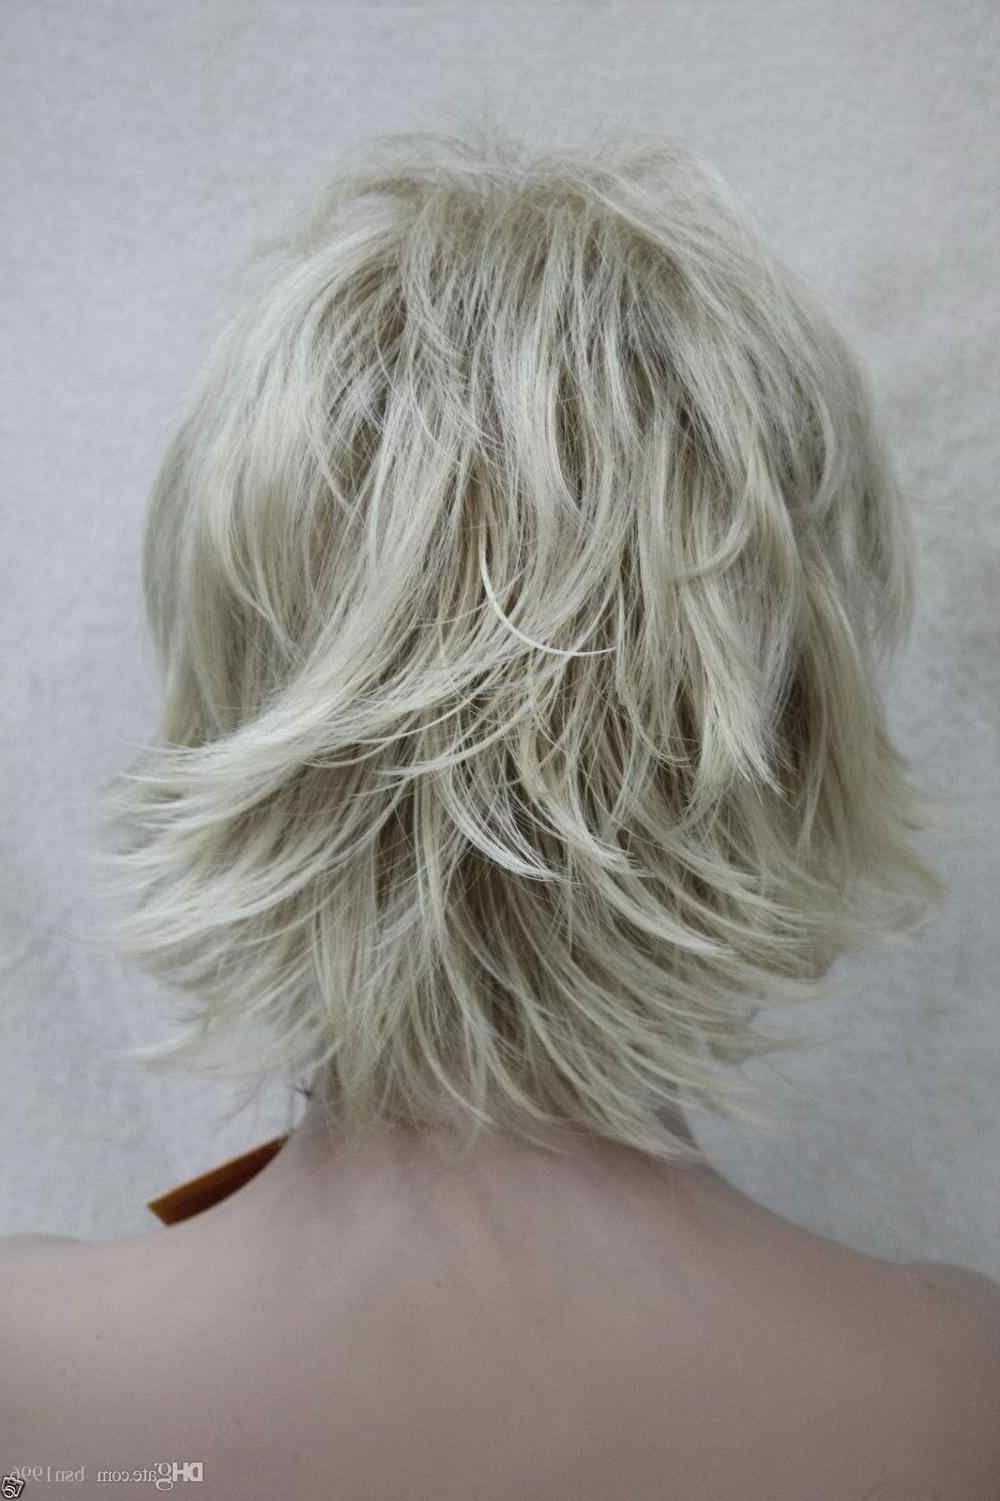 Newest Strawberry Blonde Bob Hairstyles With Flipped Ends Throughout New Strawberry Blonde Mix Blond Layers Wavy Flip Ends Short Wavy Lady's Wig (View 4 of 20)